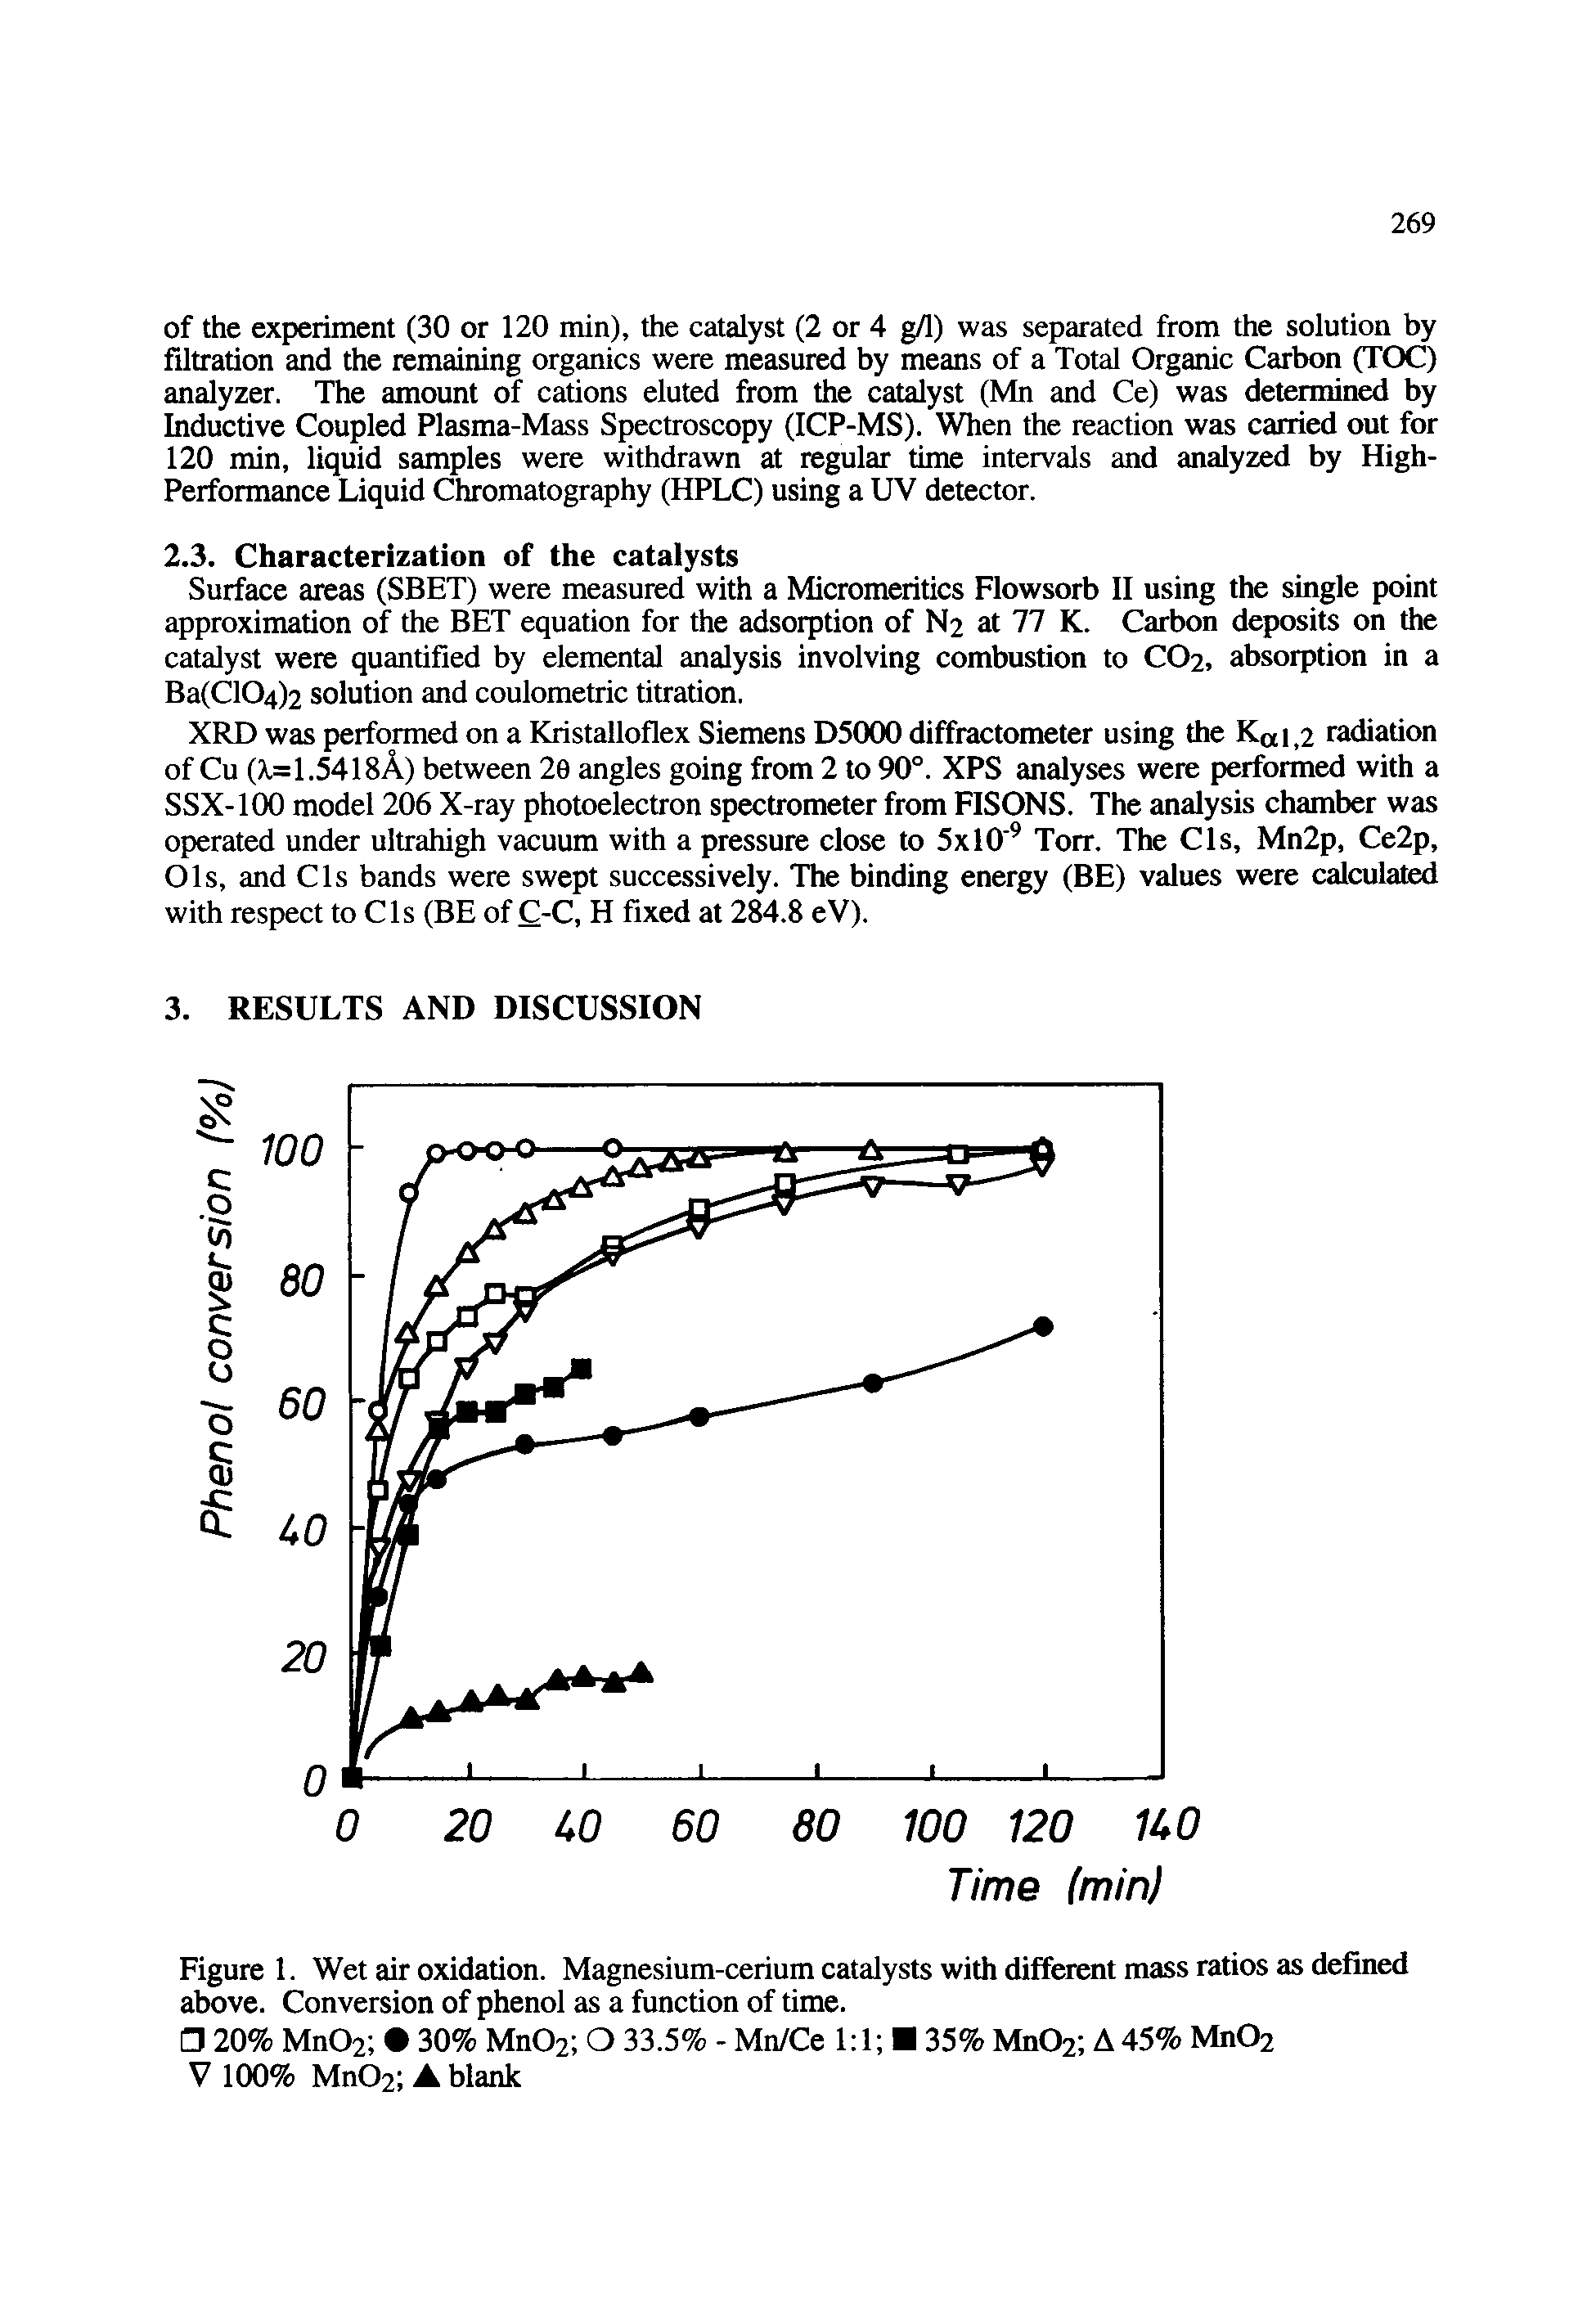 Figure 1. Wet air oxidation. Magnesium-cerium catalysts with different mass ratios as defined above. Conversion of phenol as a function of time.